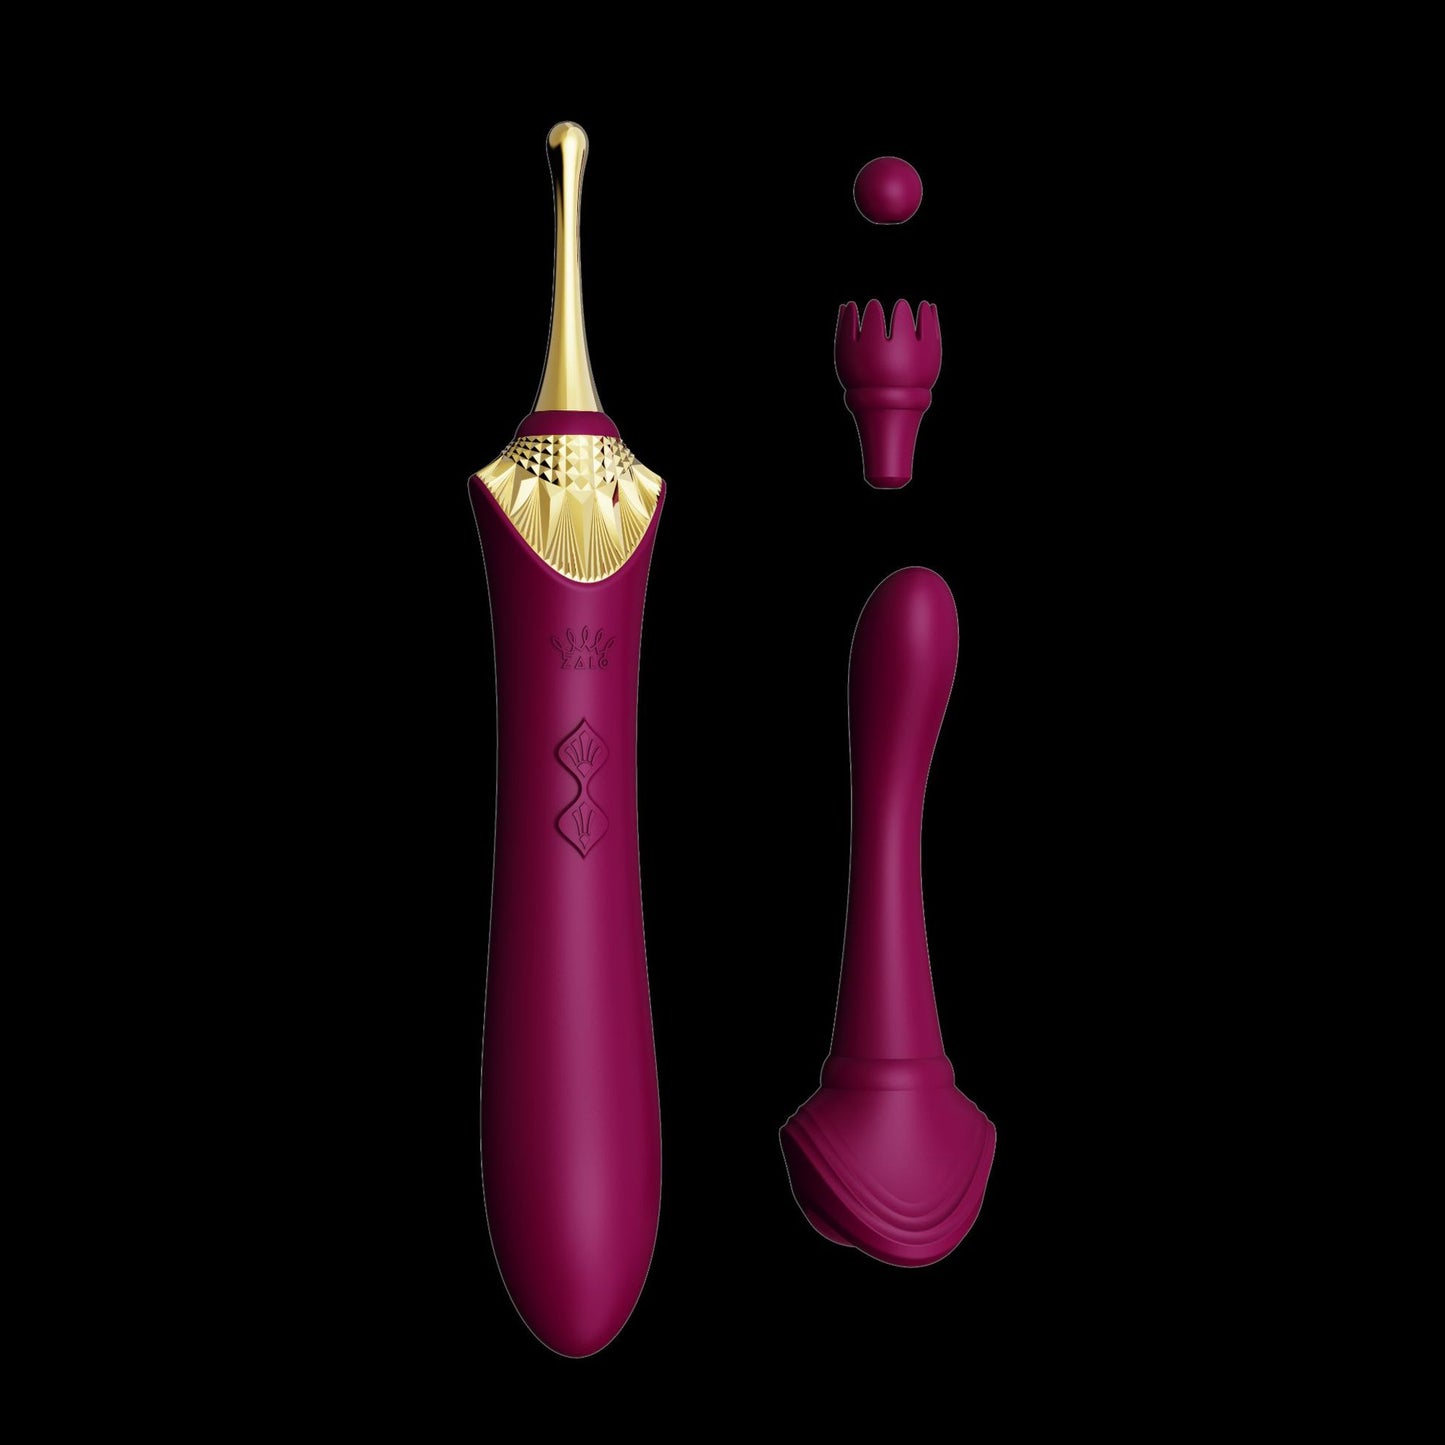 Best two-headed Vibrator Moves Couples To Share Flirting luxury Products for Adults - Nikita Studio